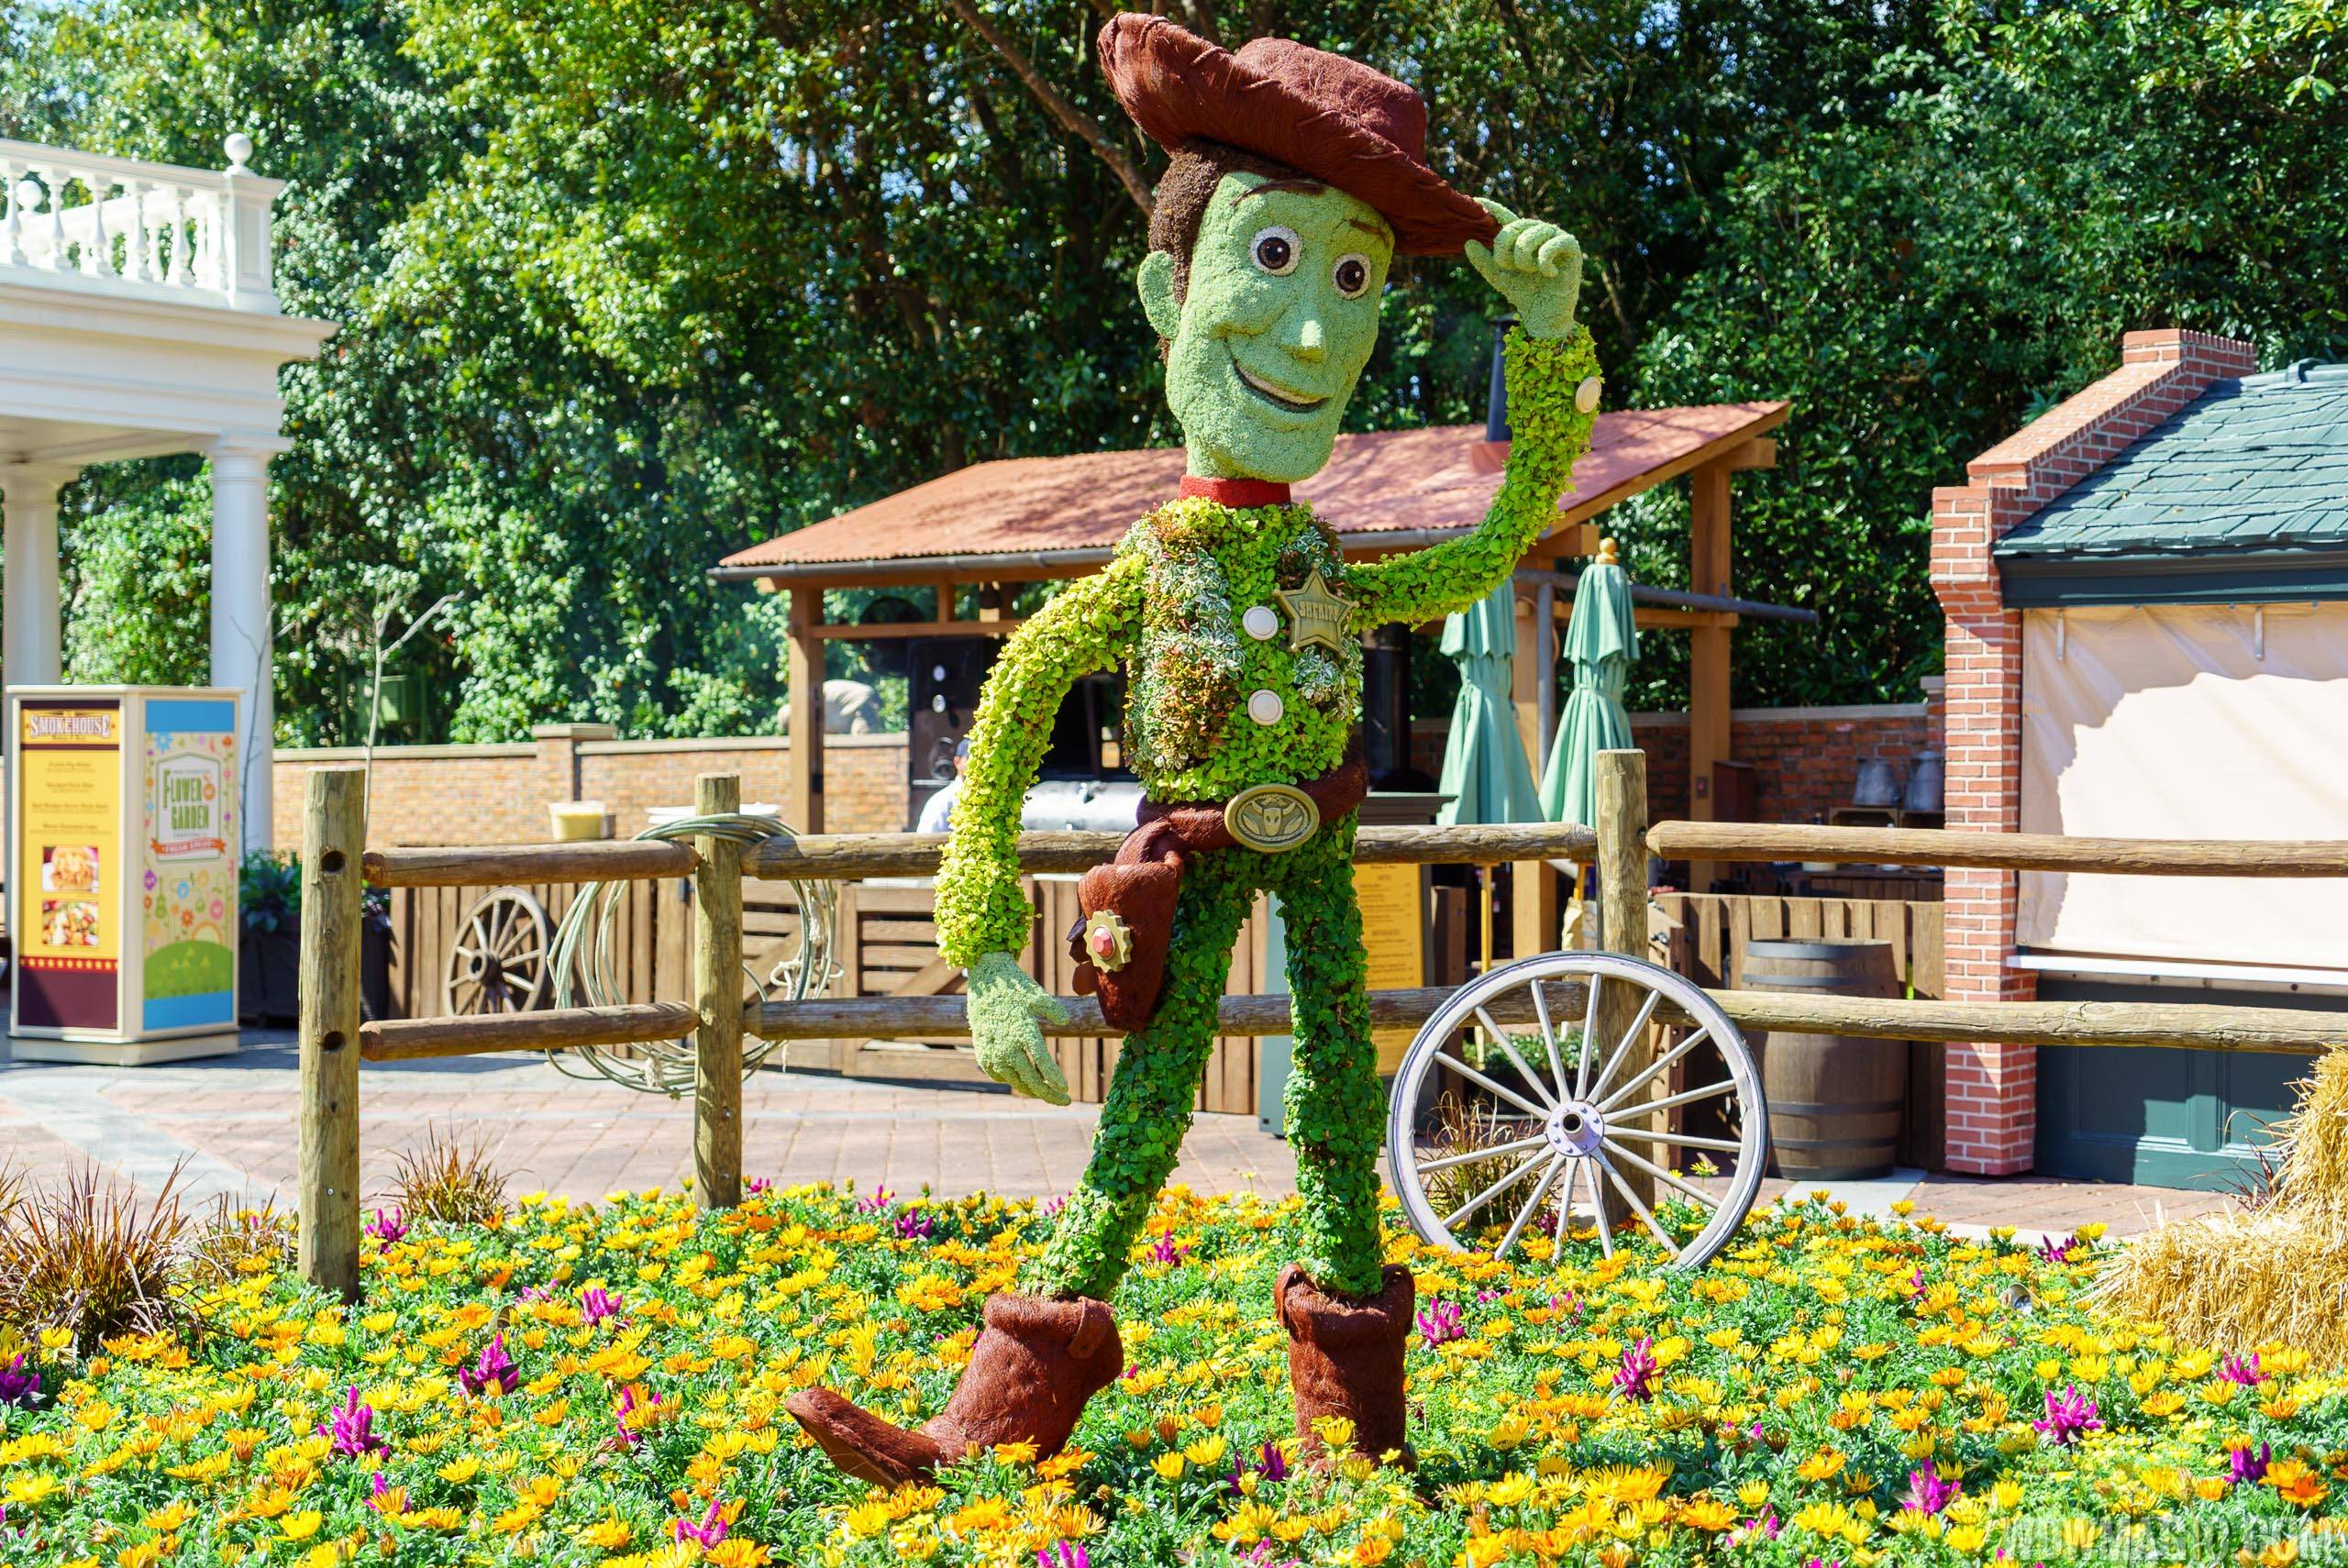 2016 Epcot International Flower and Garden Festival - Woody topiary